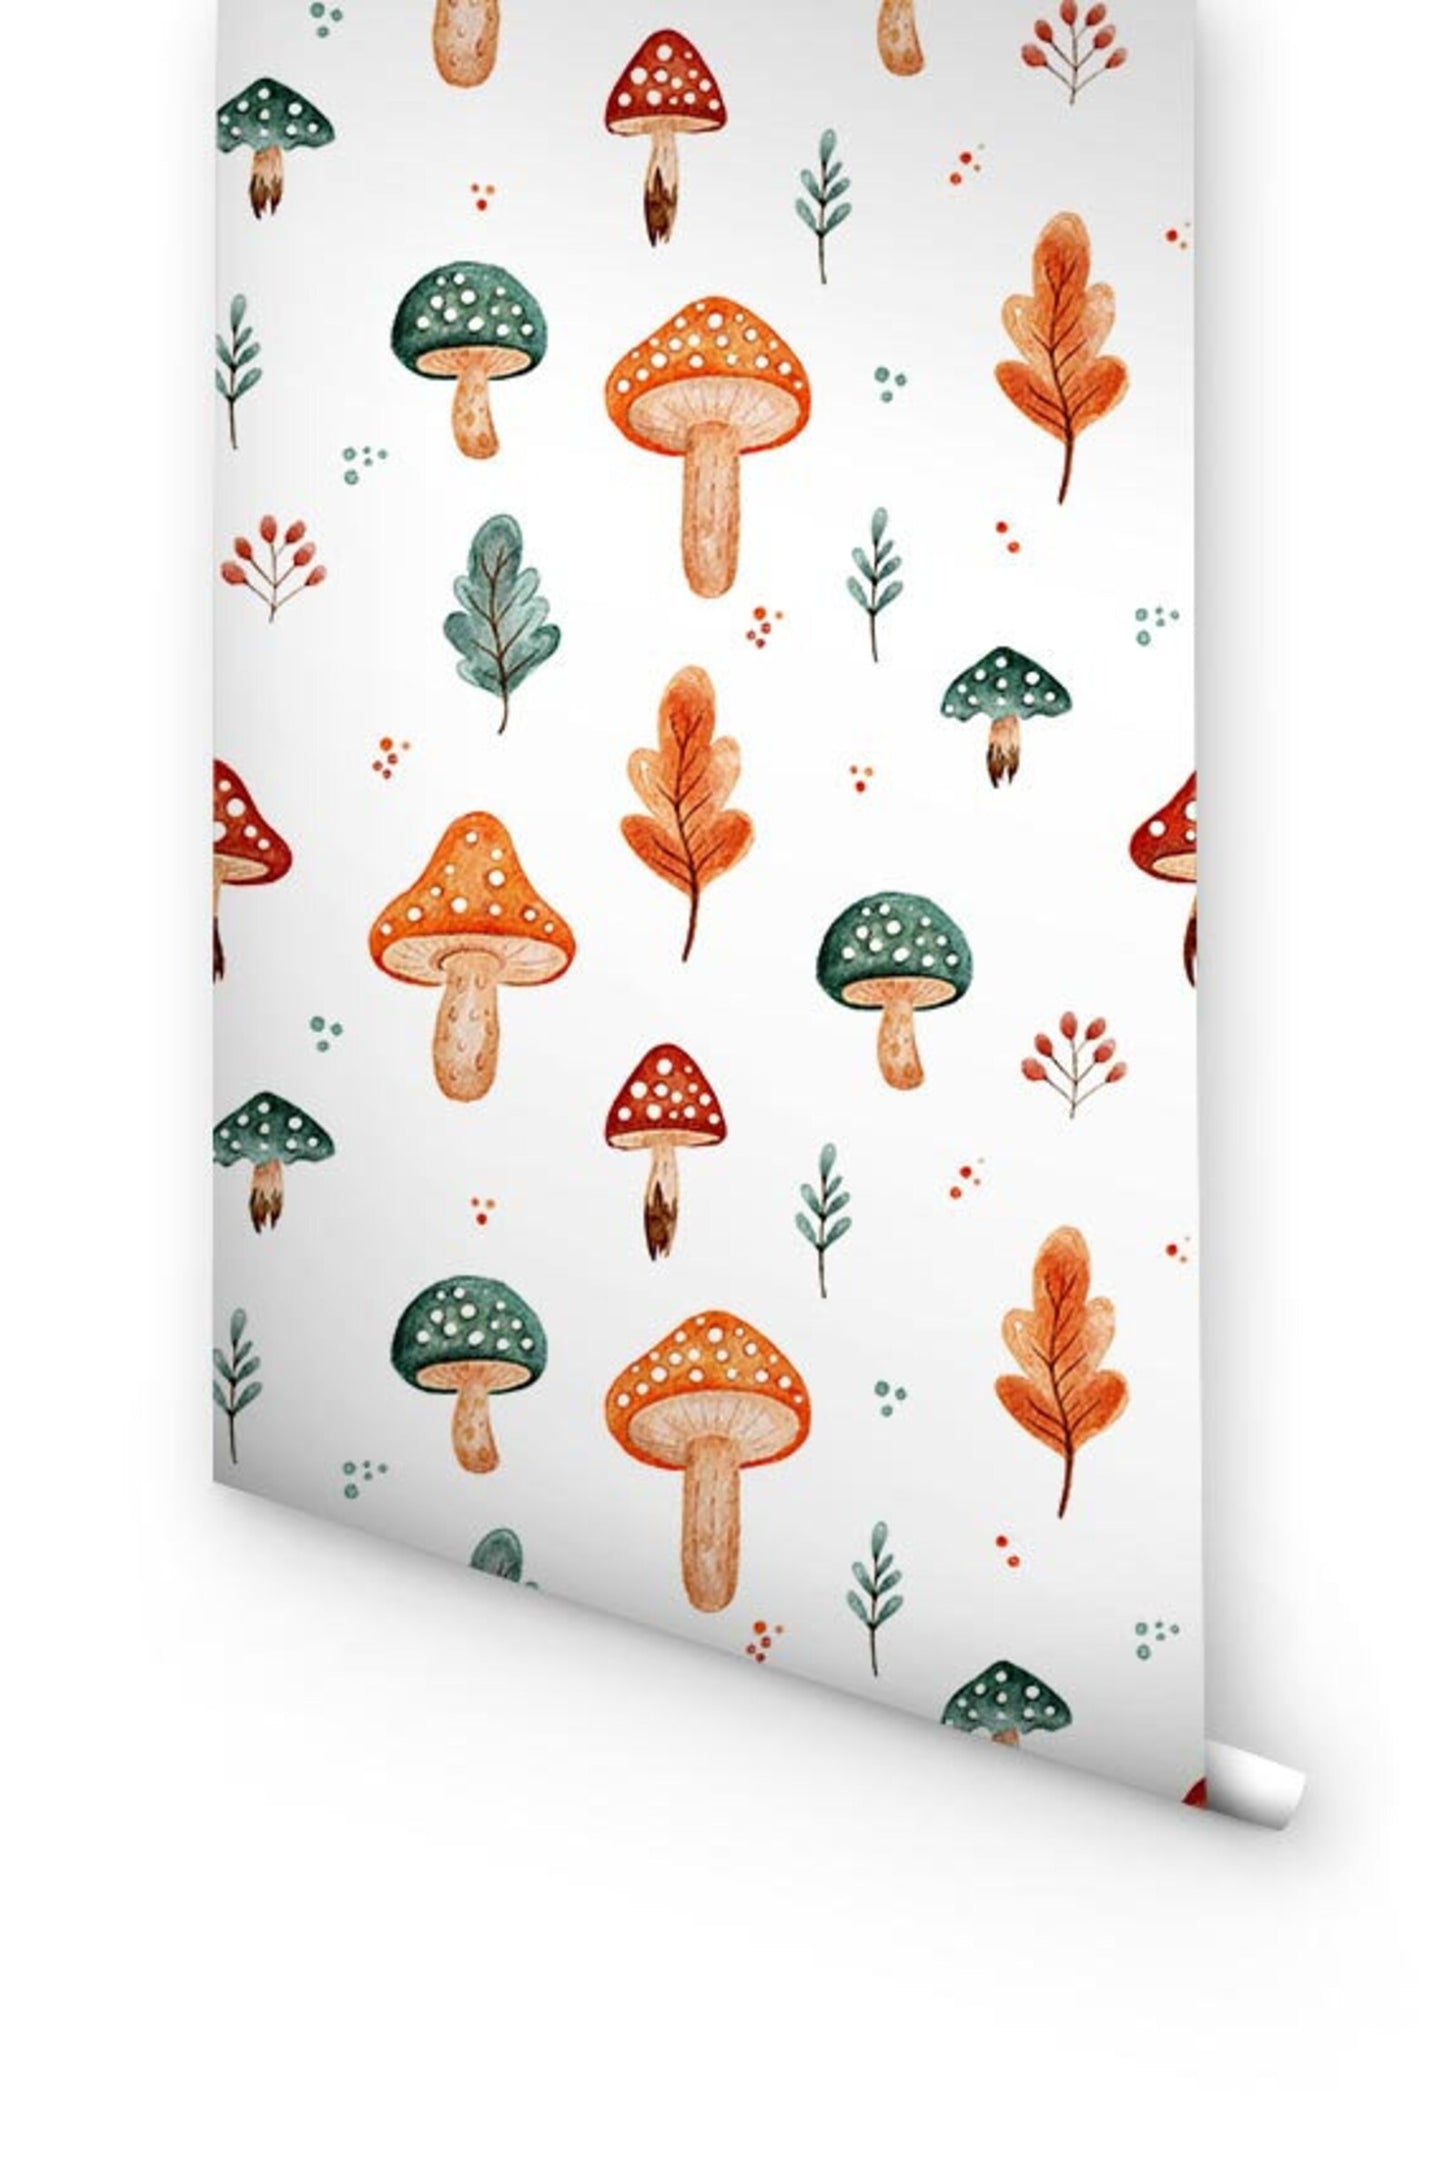 Easy installation with peel and stick mushroom wallpaper, a convenient and stylish solution for hassle-free decor